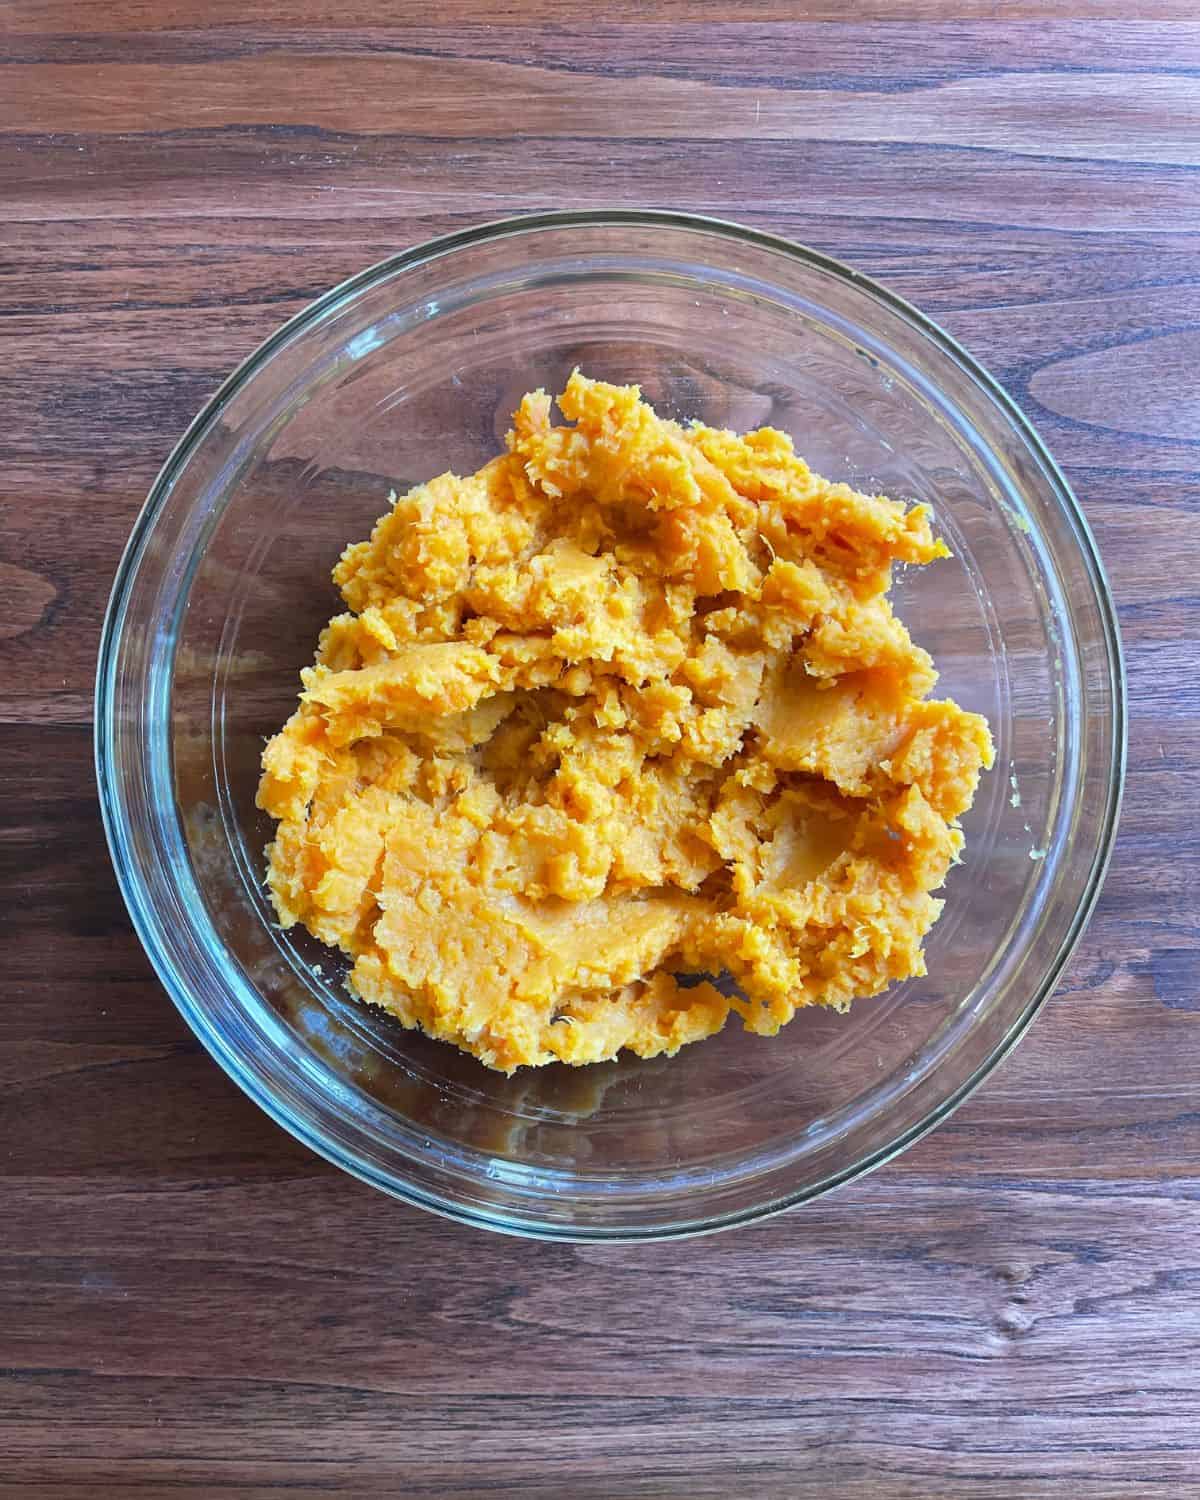 Mashed sweet potatoes in a bowl.